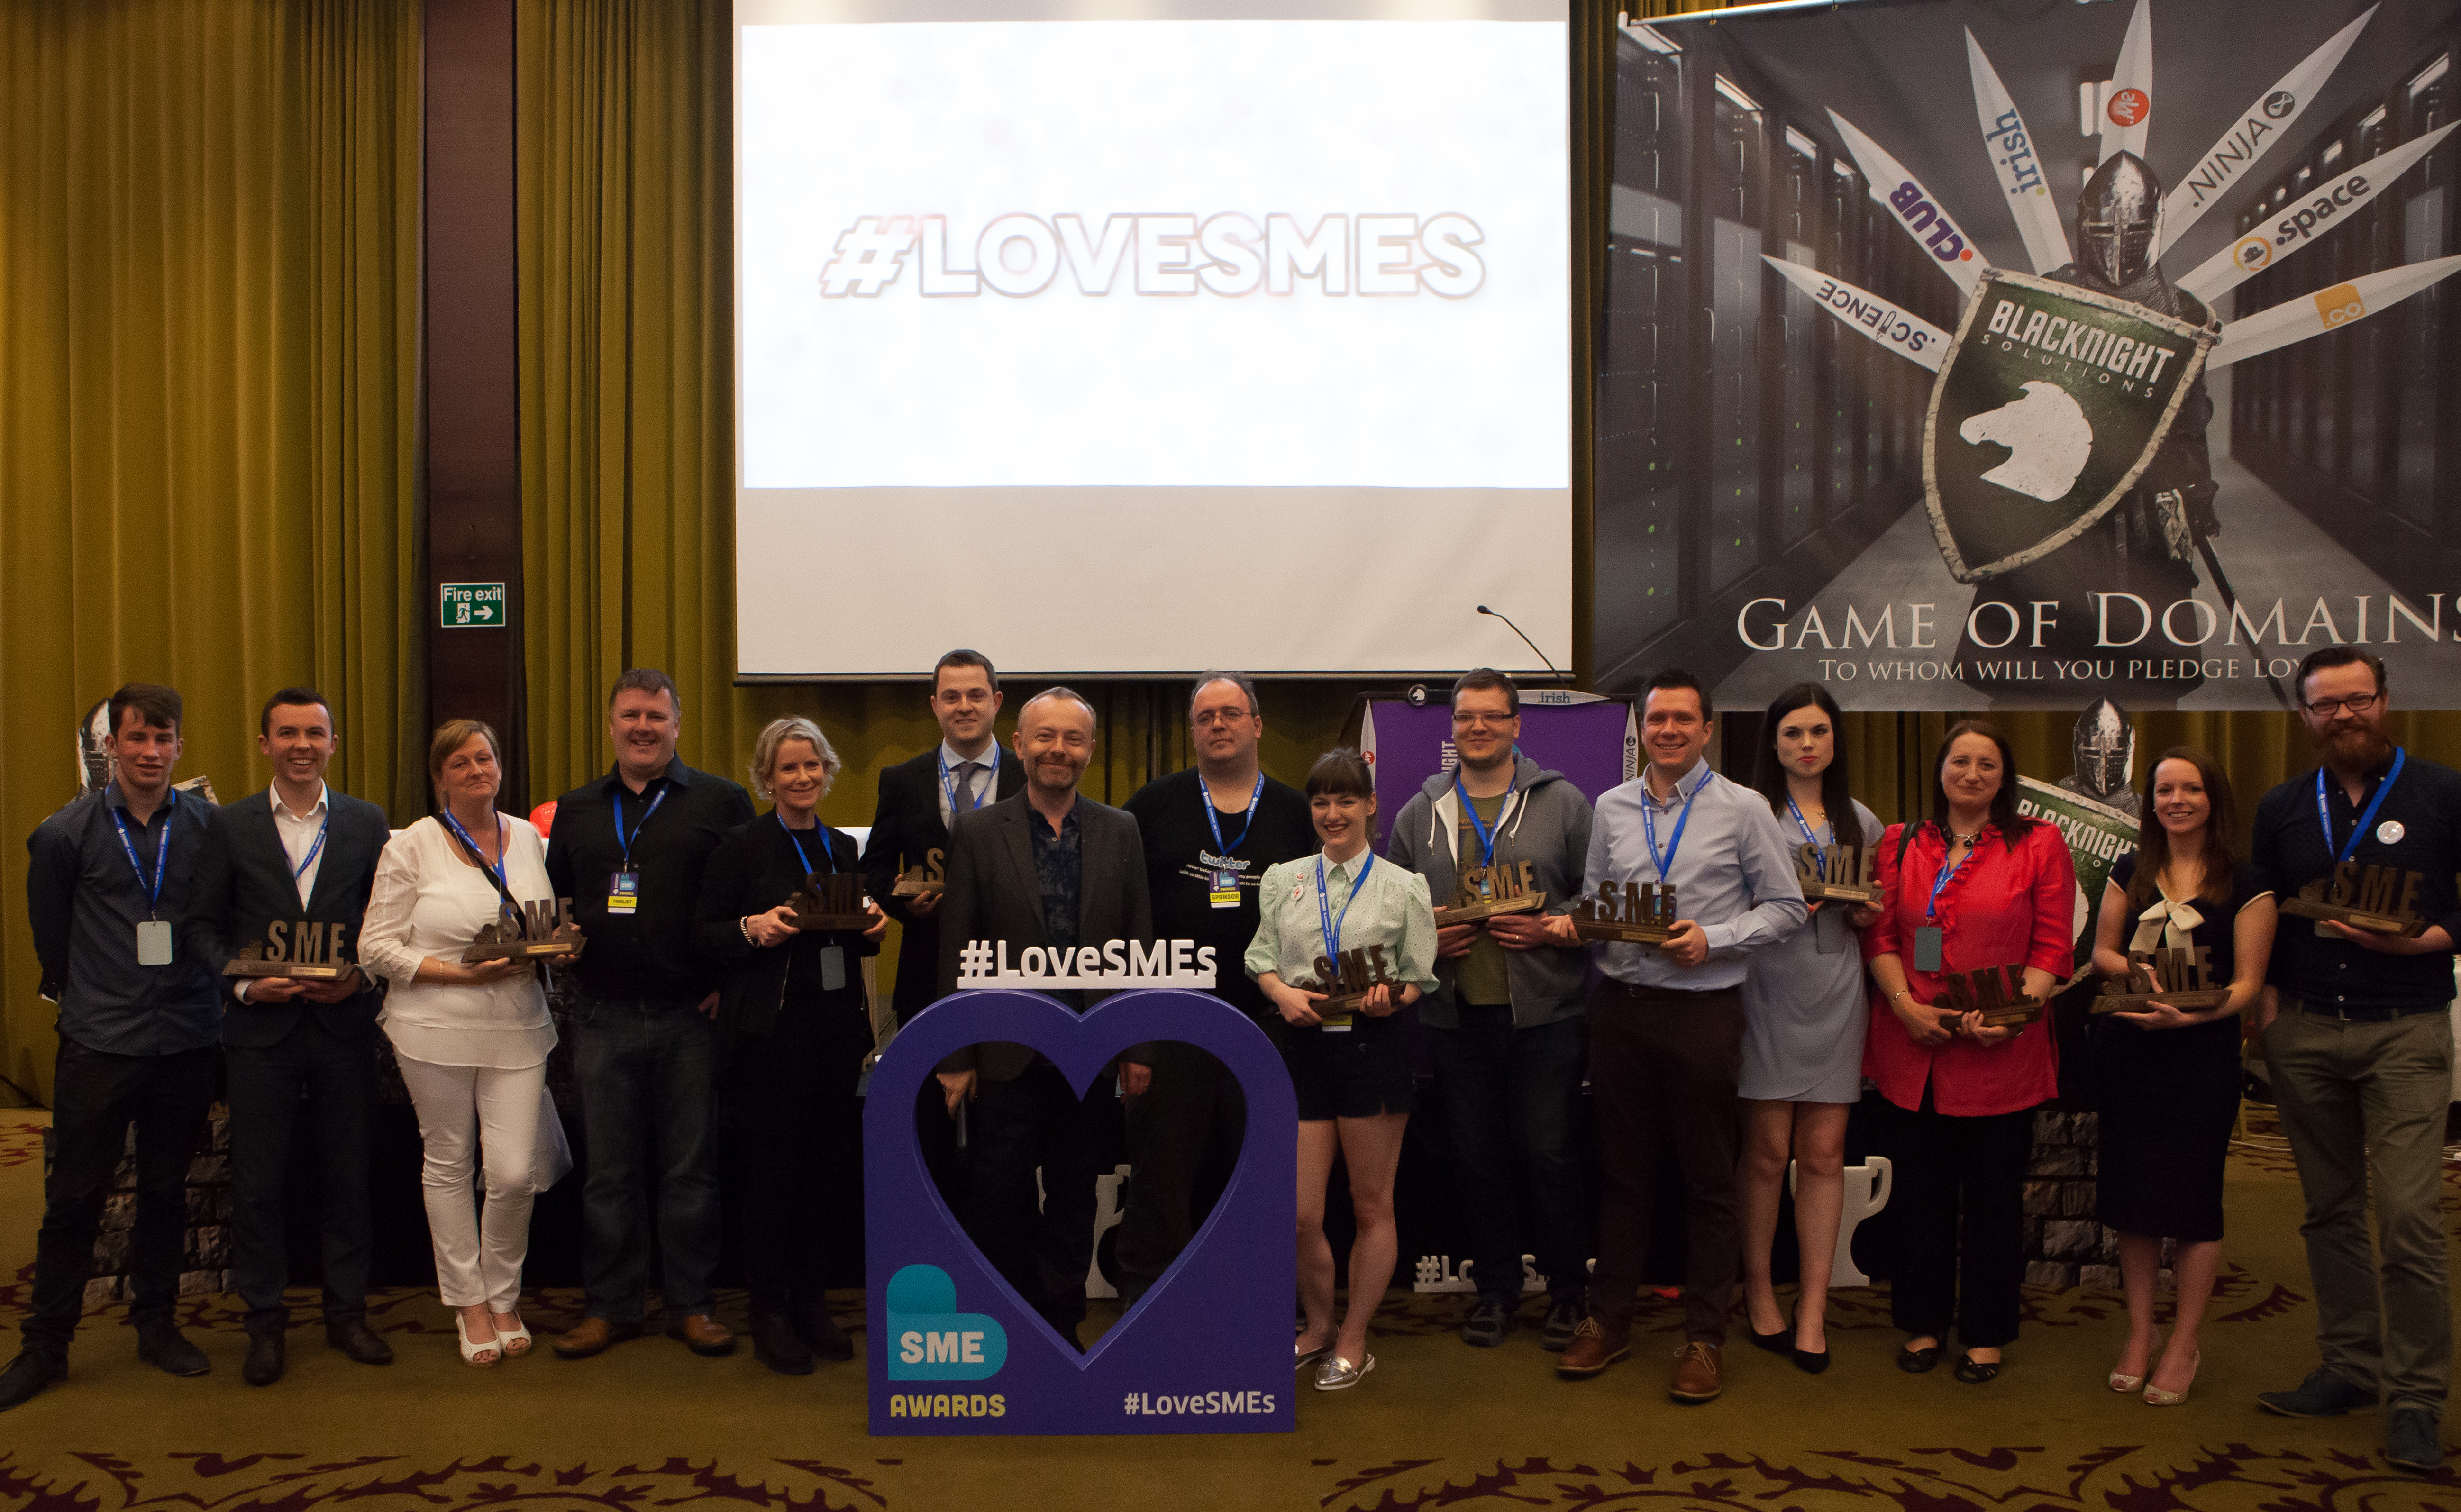 The Winners of the 2015 Blacknight SME Awards. Photo Credit: Ryan Whalley